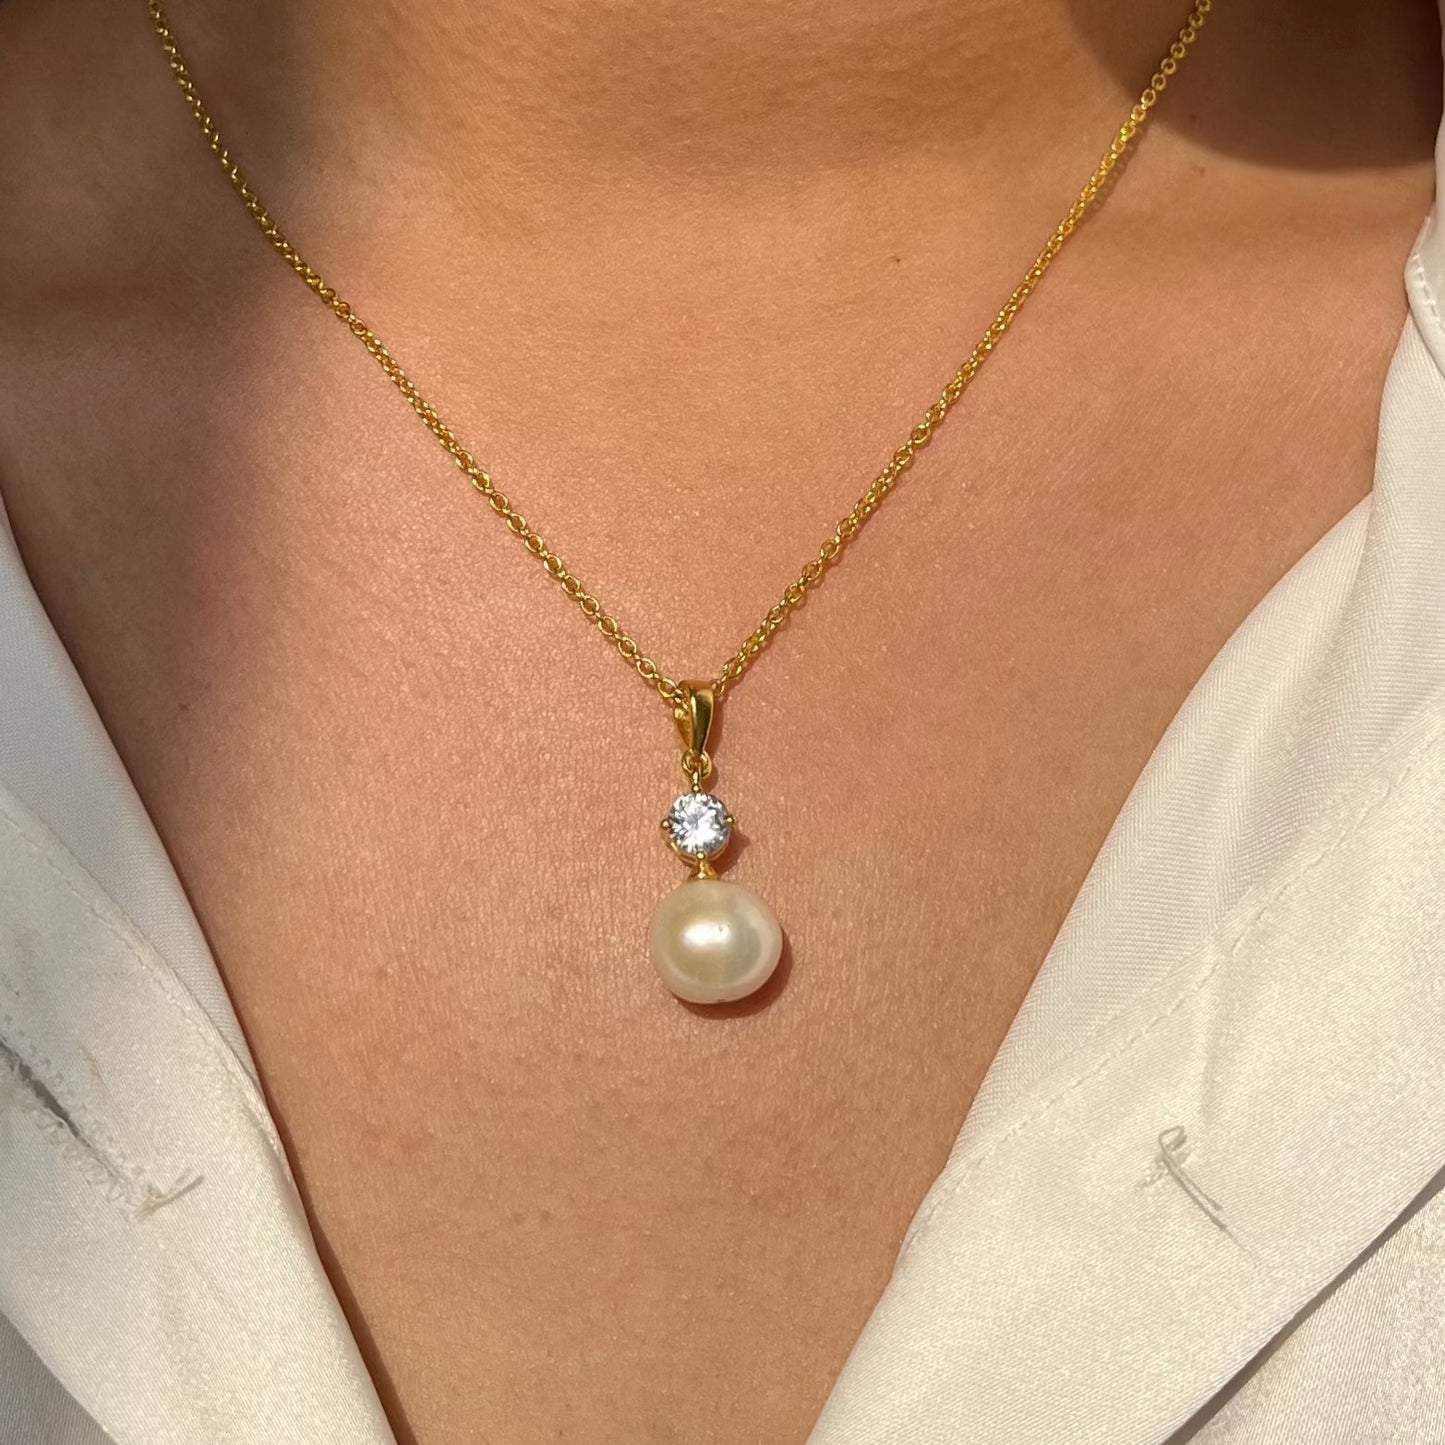 Solitaire Pearl Silver Necklace - From Purl Purl